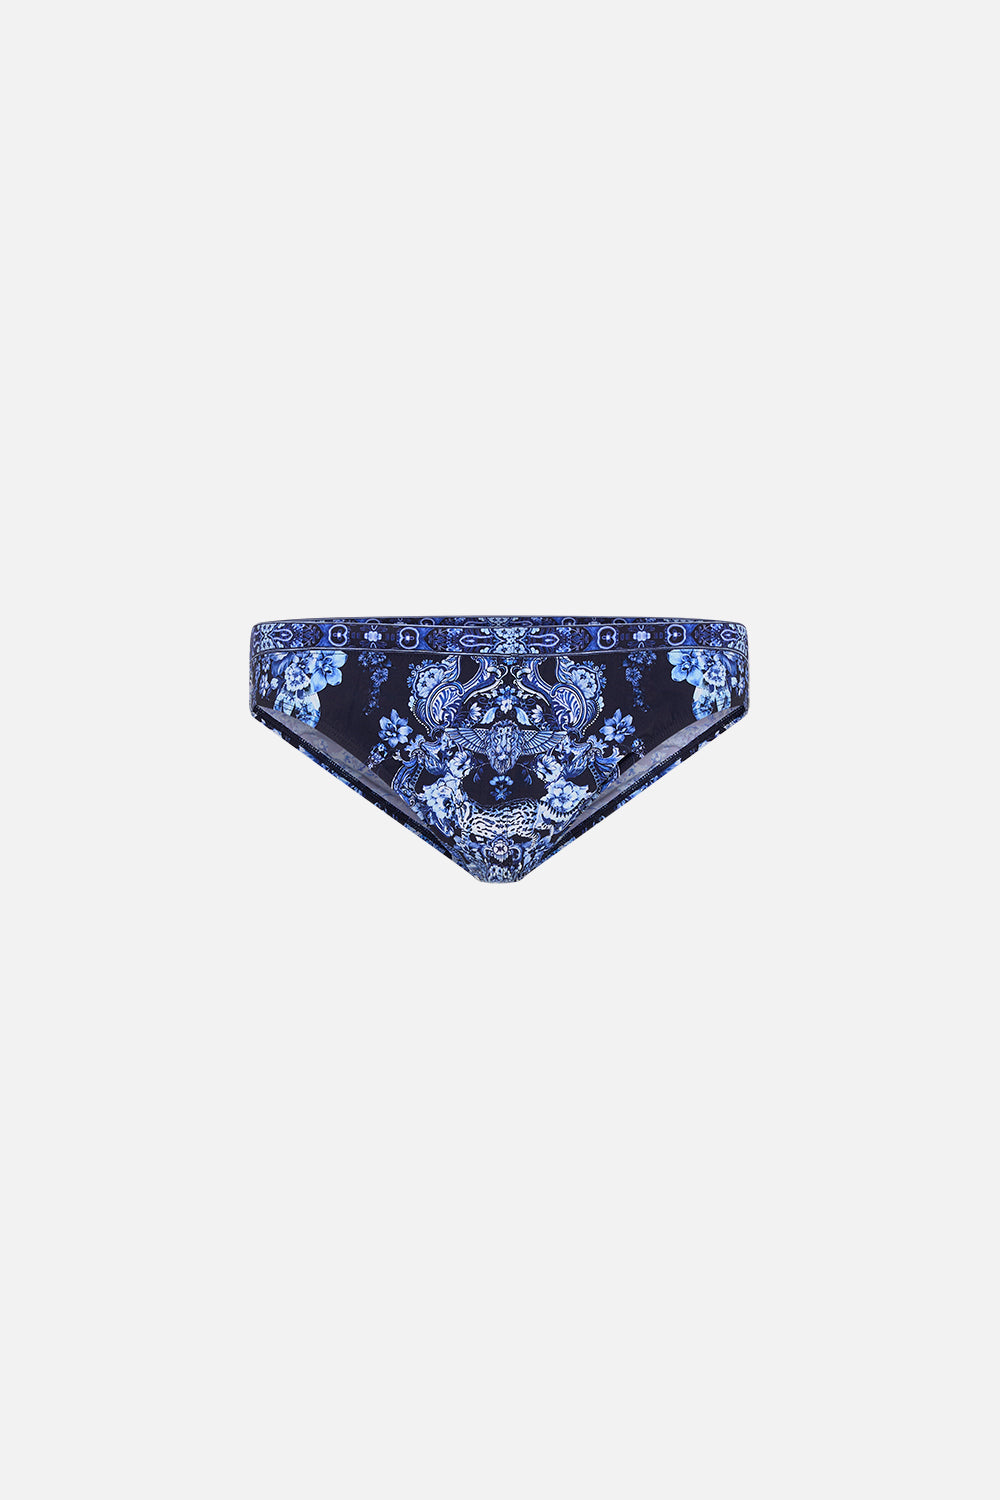 Front product view of Hotel Franks By CAMILLA mens swim brief in Delft Dynasty print